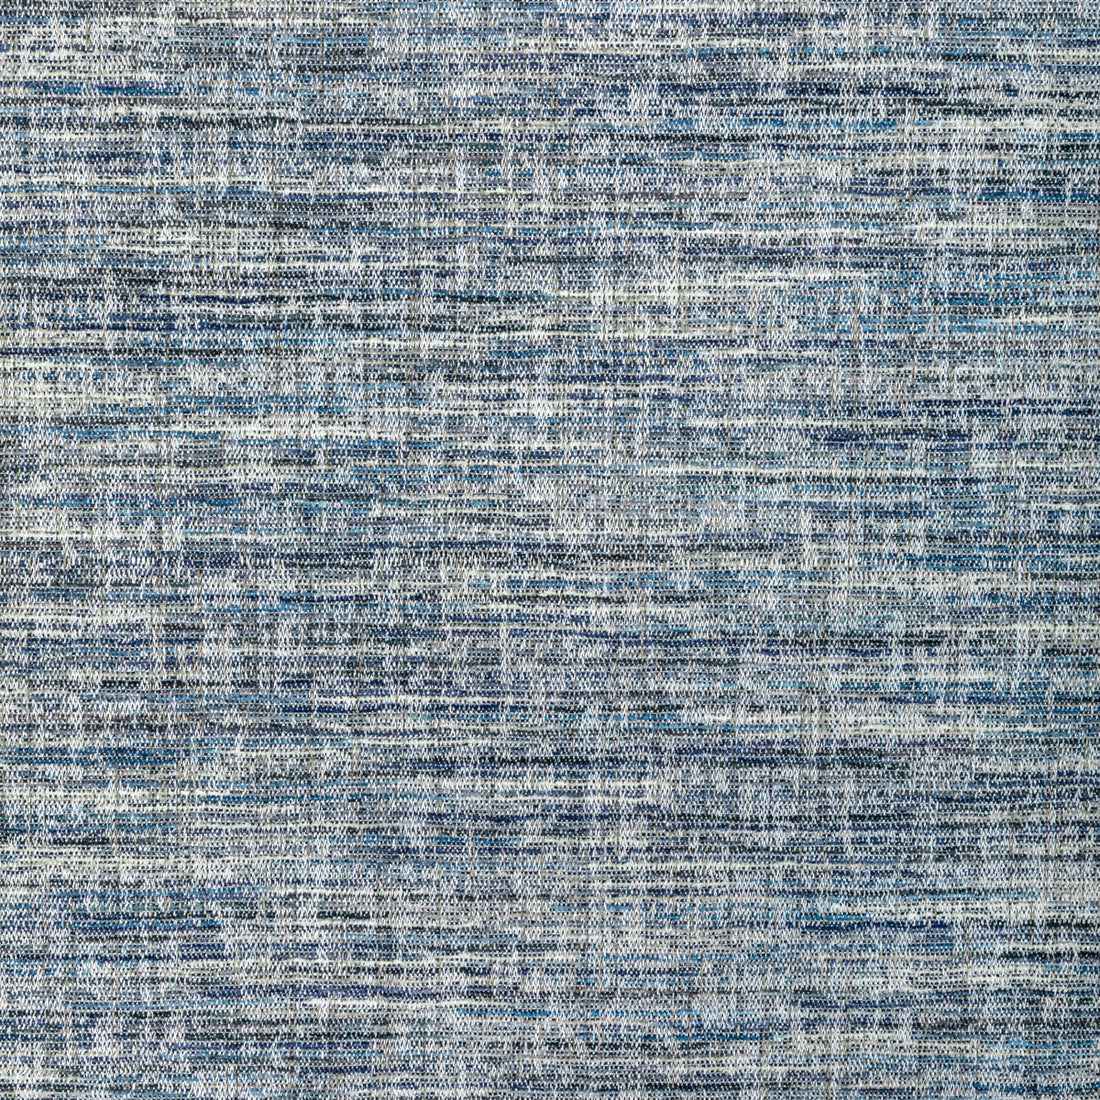 Bluff Trail fabric in indigo color - pattern 36382.5.0 - by Kravet Smart in the Jeffrey Alan Marks Seascapes collection